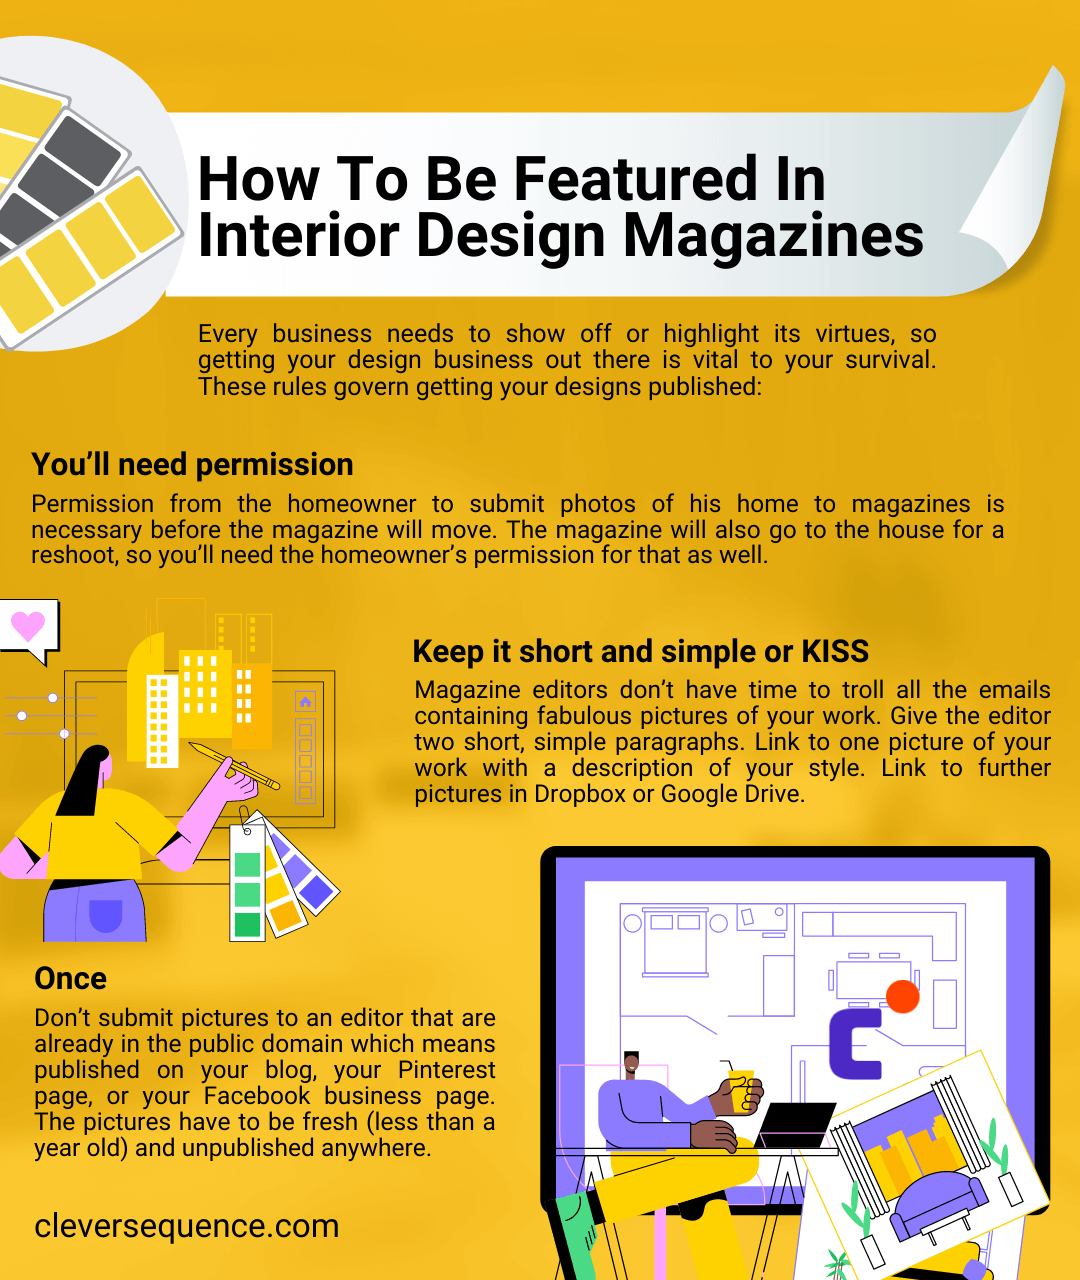 How To Be Featured In Interior Design Magazines how to start an interior design business without a degree